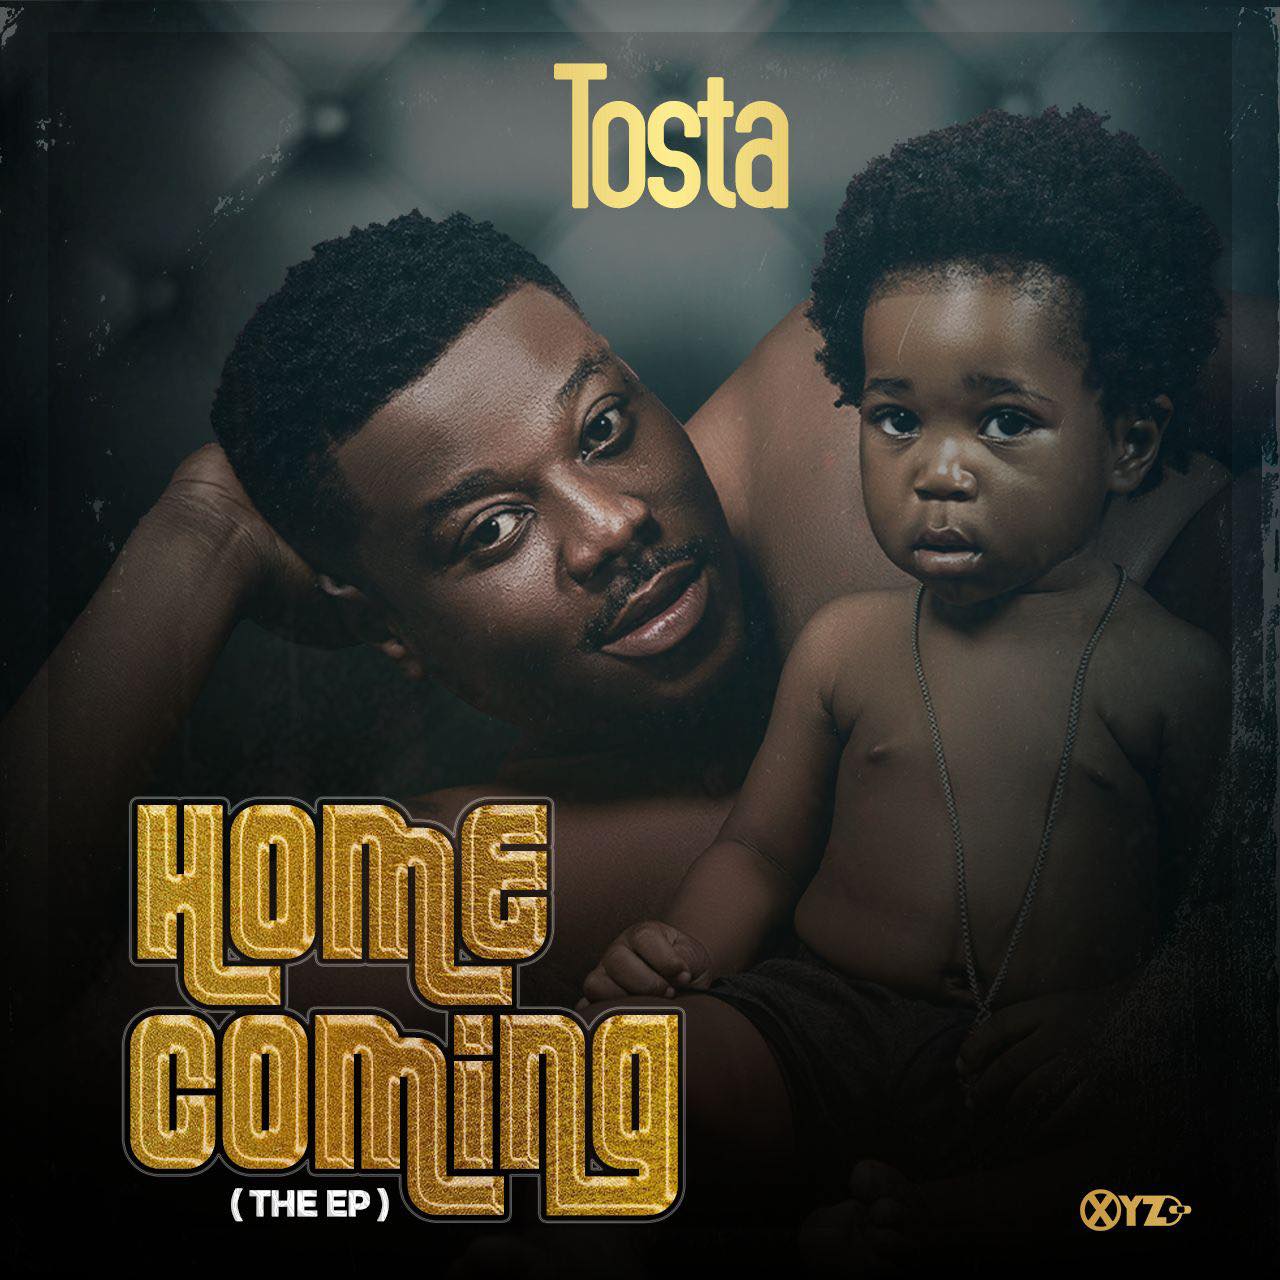 Tosta – Homecoming EP